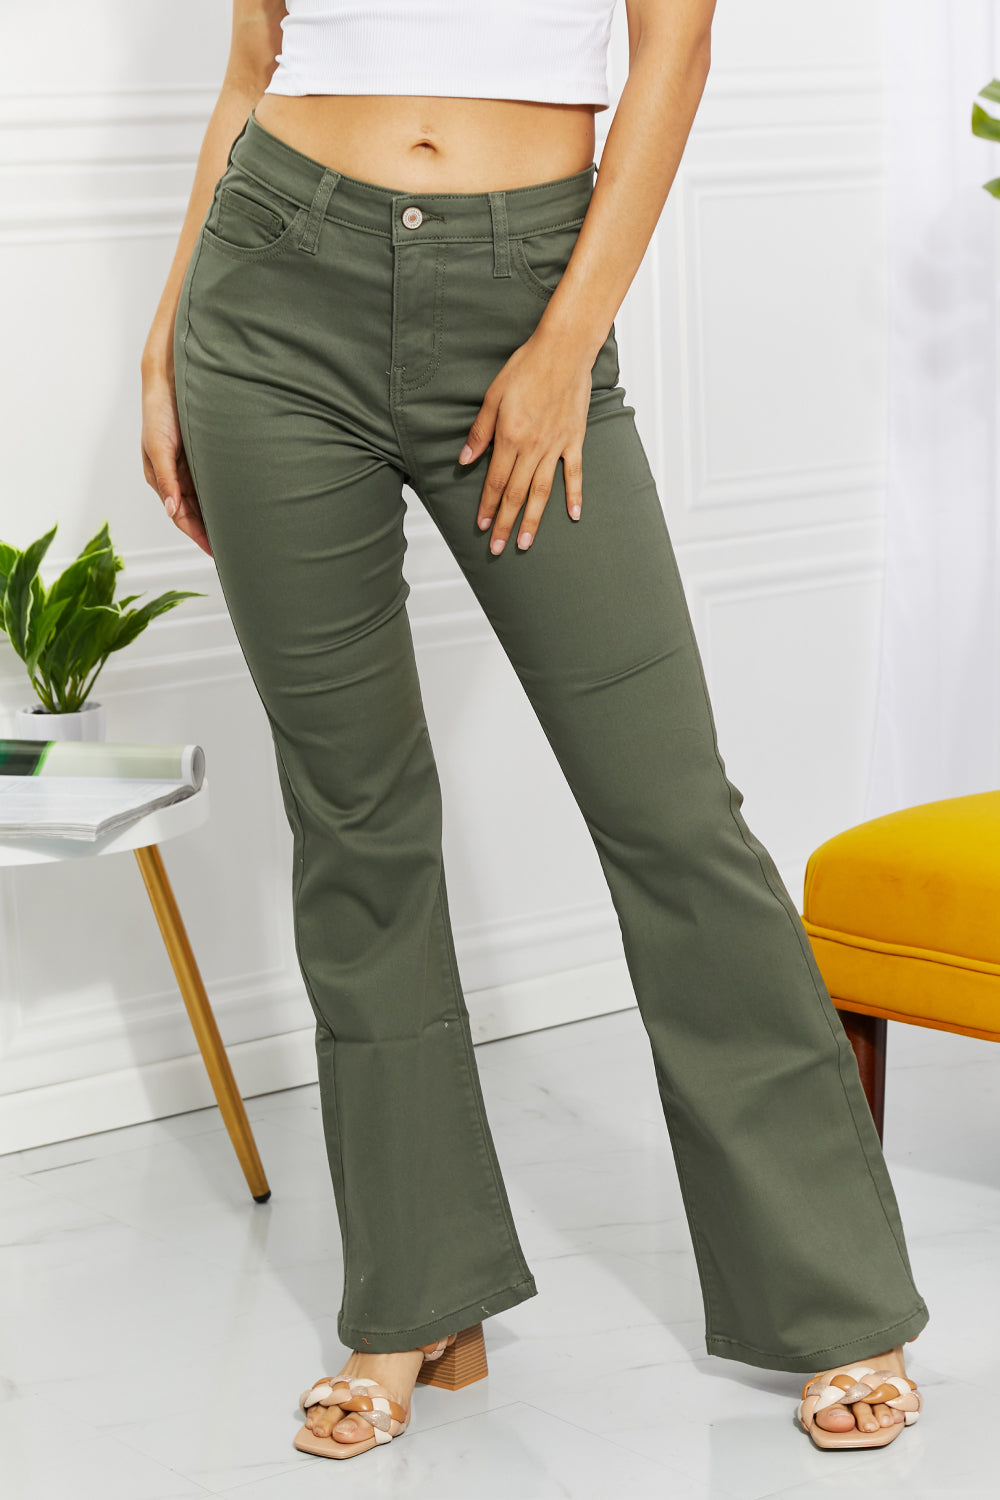 Women's Zenana Clementine Full Size High-Rise Bootcut Jeans in Olive